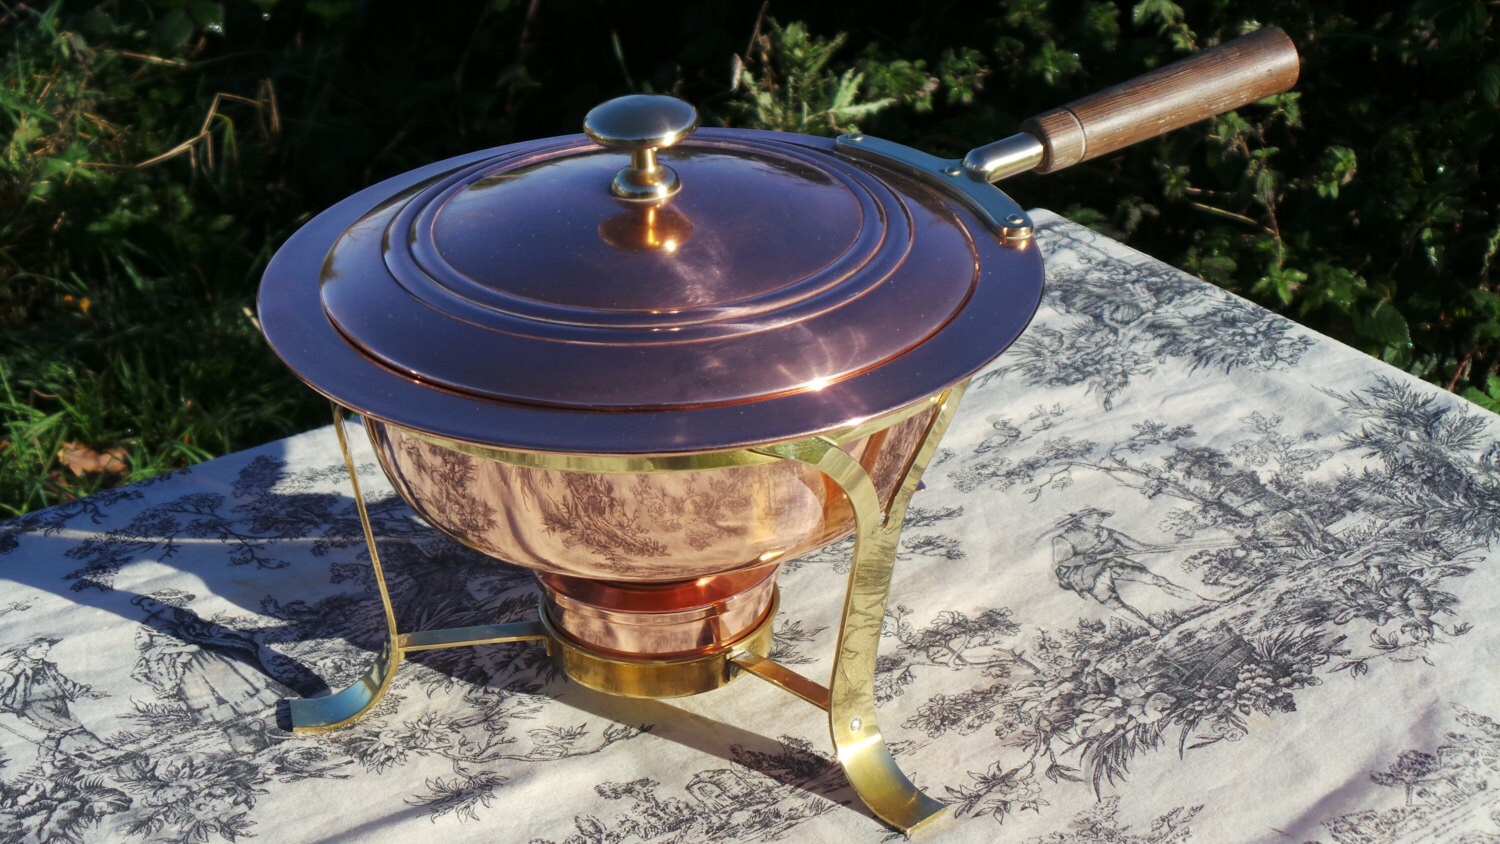 New NKC Copper 28cm Rondeau 28 cm 11 Big NKC Saute Two Handle Casserole  Cuivre Traditionally Made Tin lined New Normandy Kitchen Copper